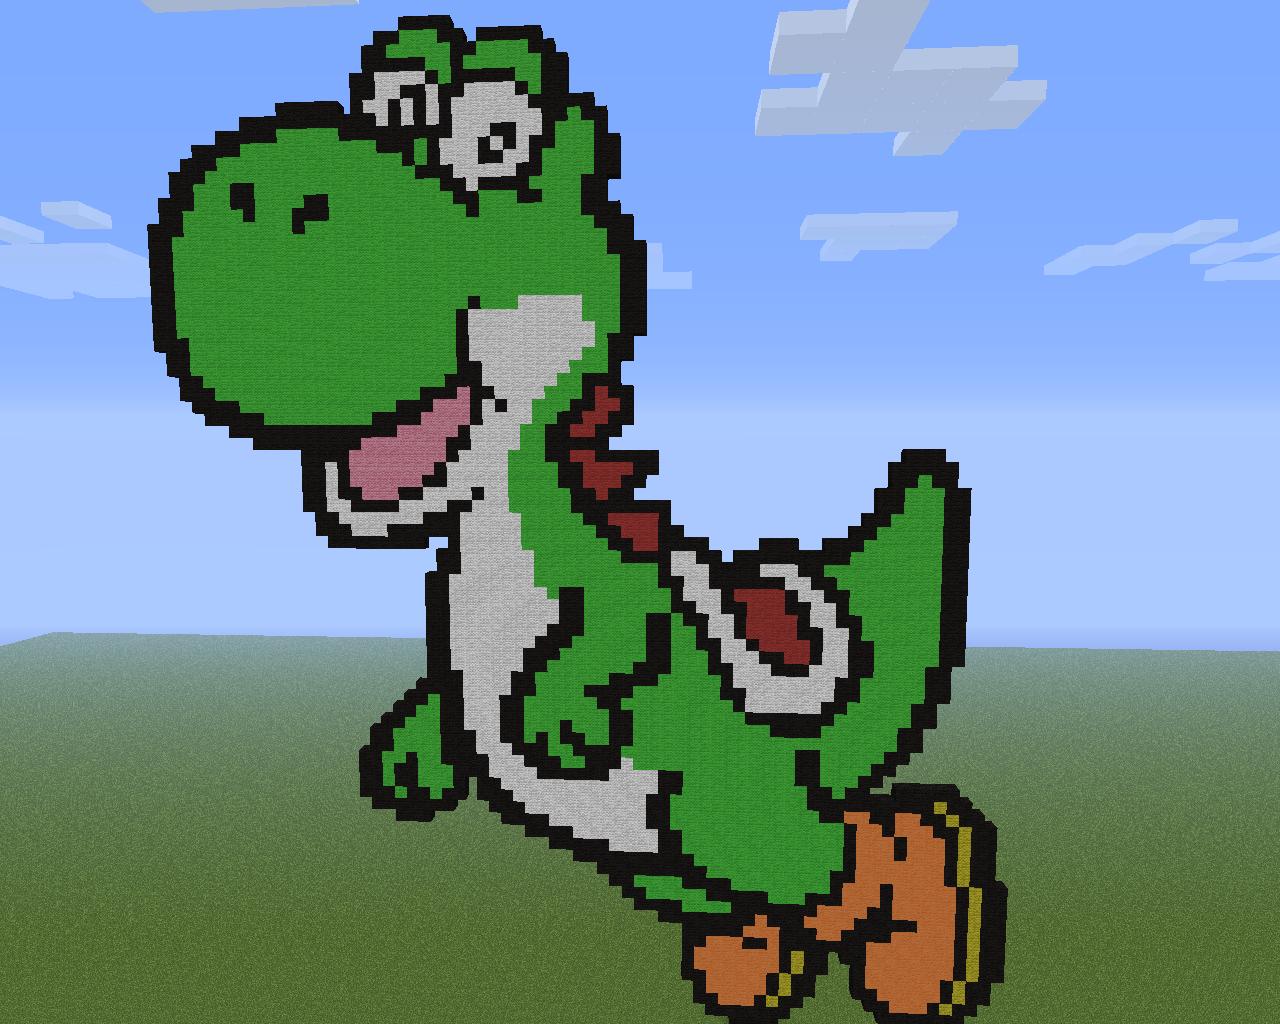 Yoshi artwork created using media that is simply out of the ordinary! 